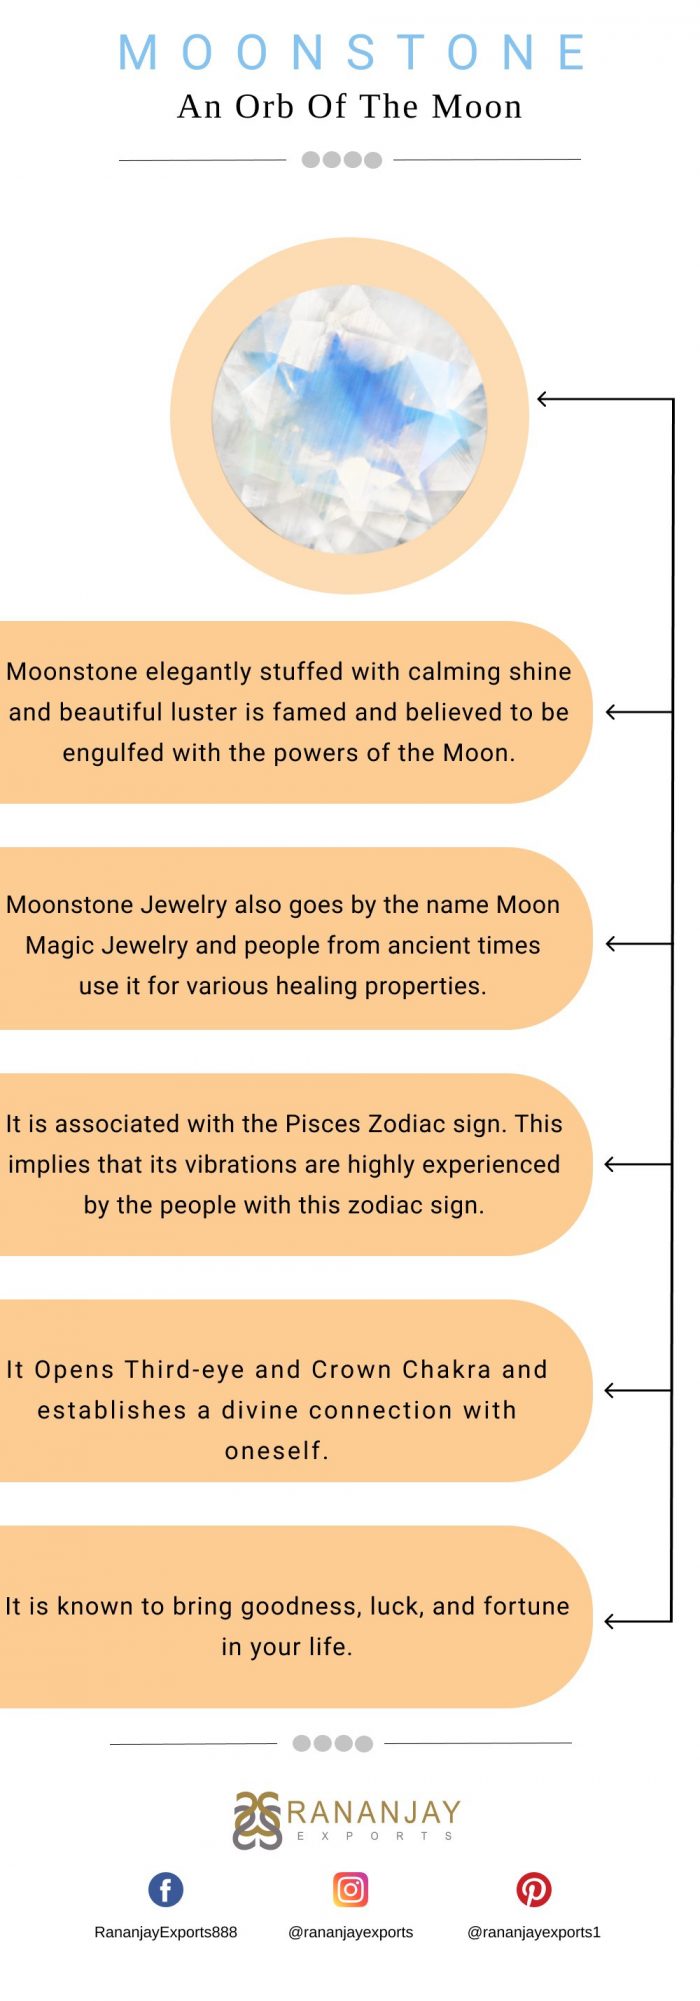 Moonstone – An Orb of the Moon